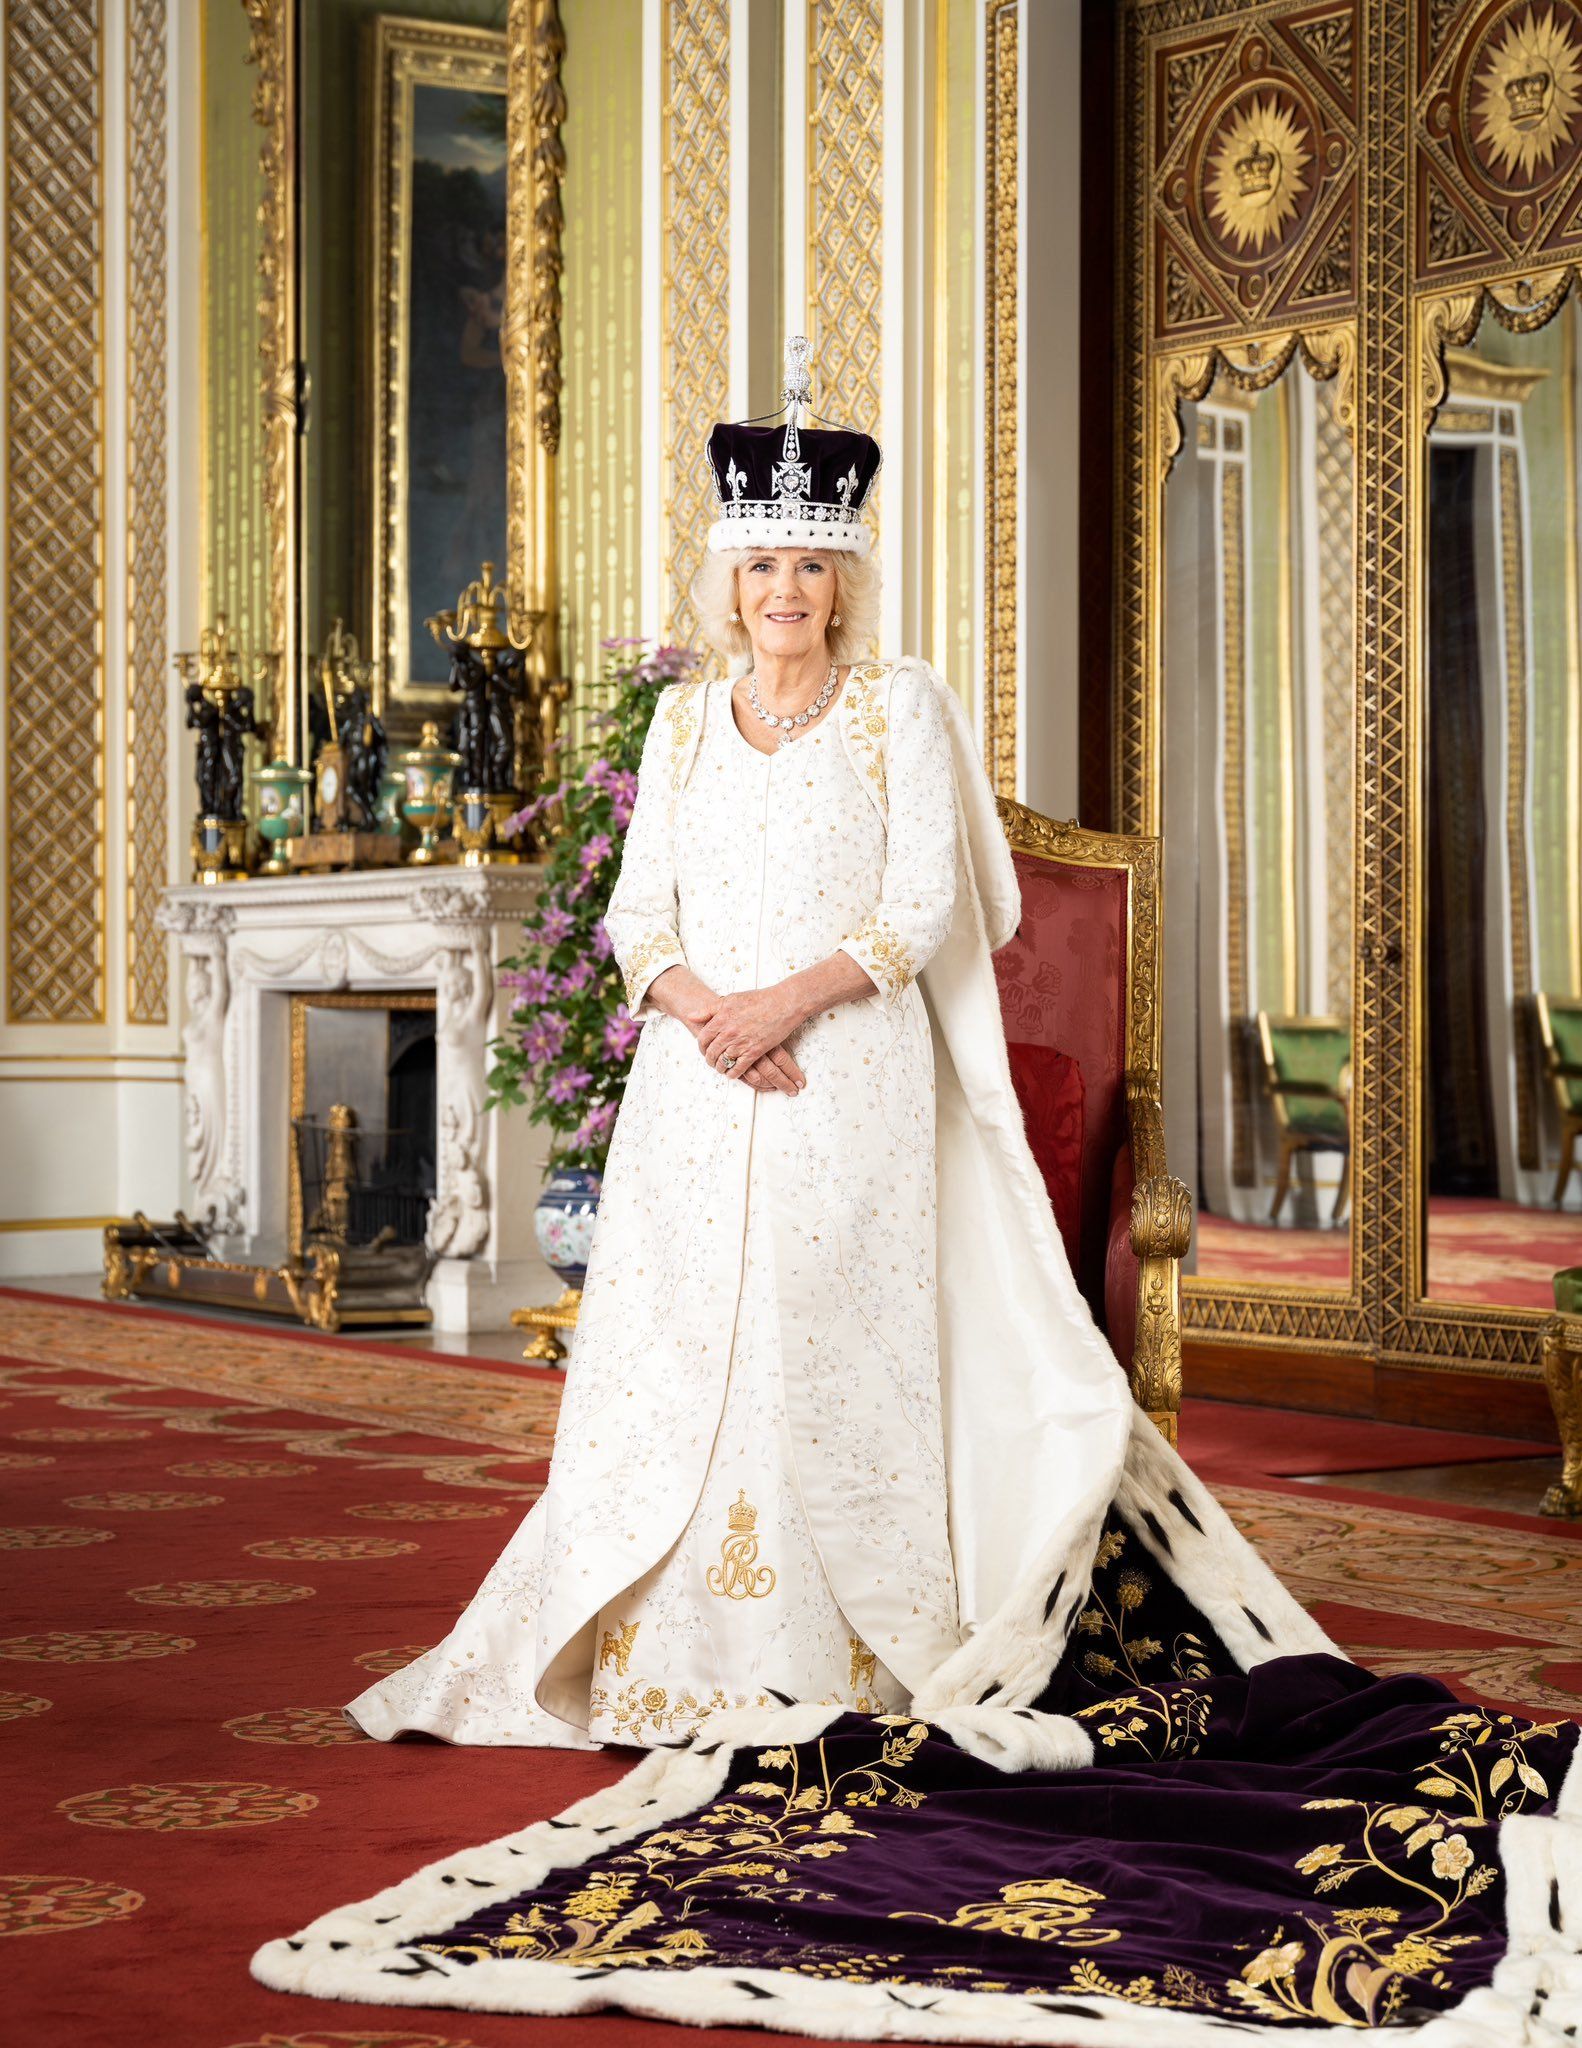 Her Majesty Queen Camilla is pictured in The Green Drawing Room.